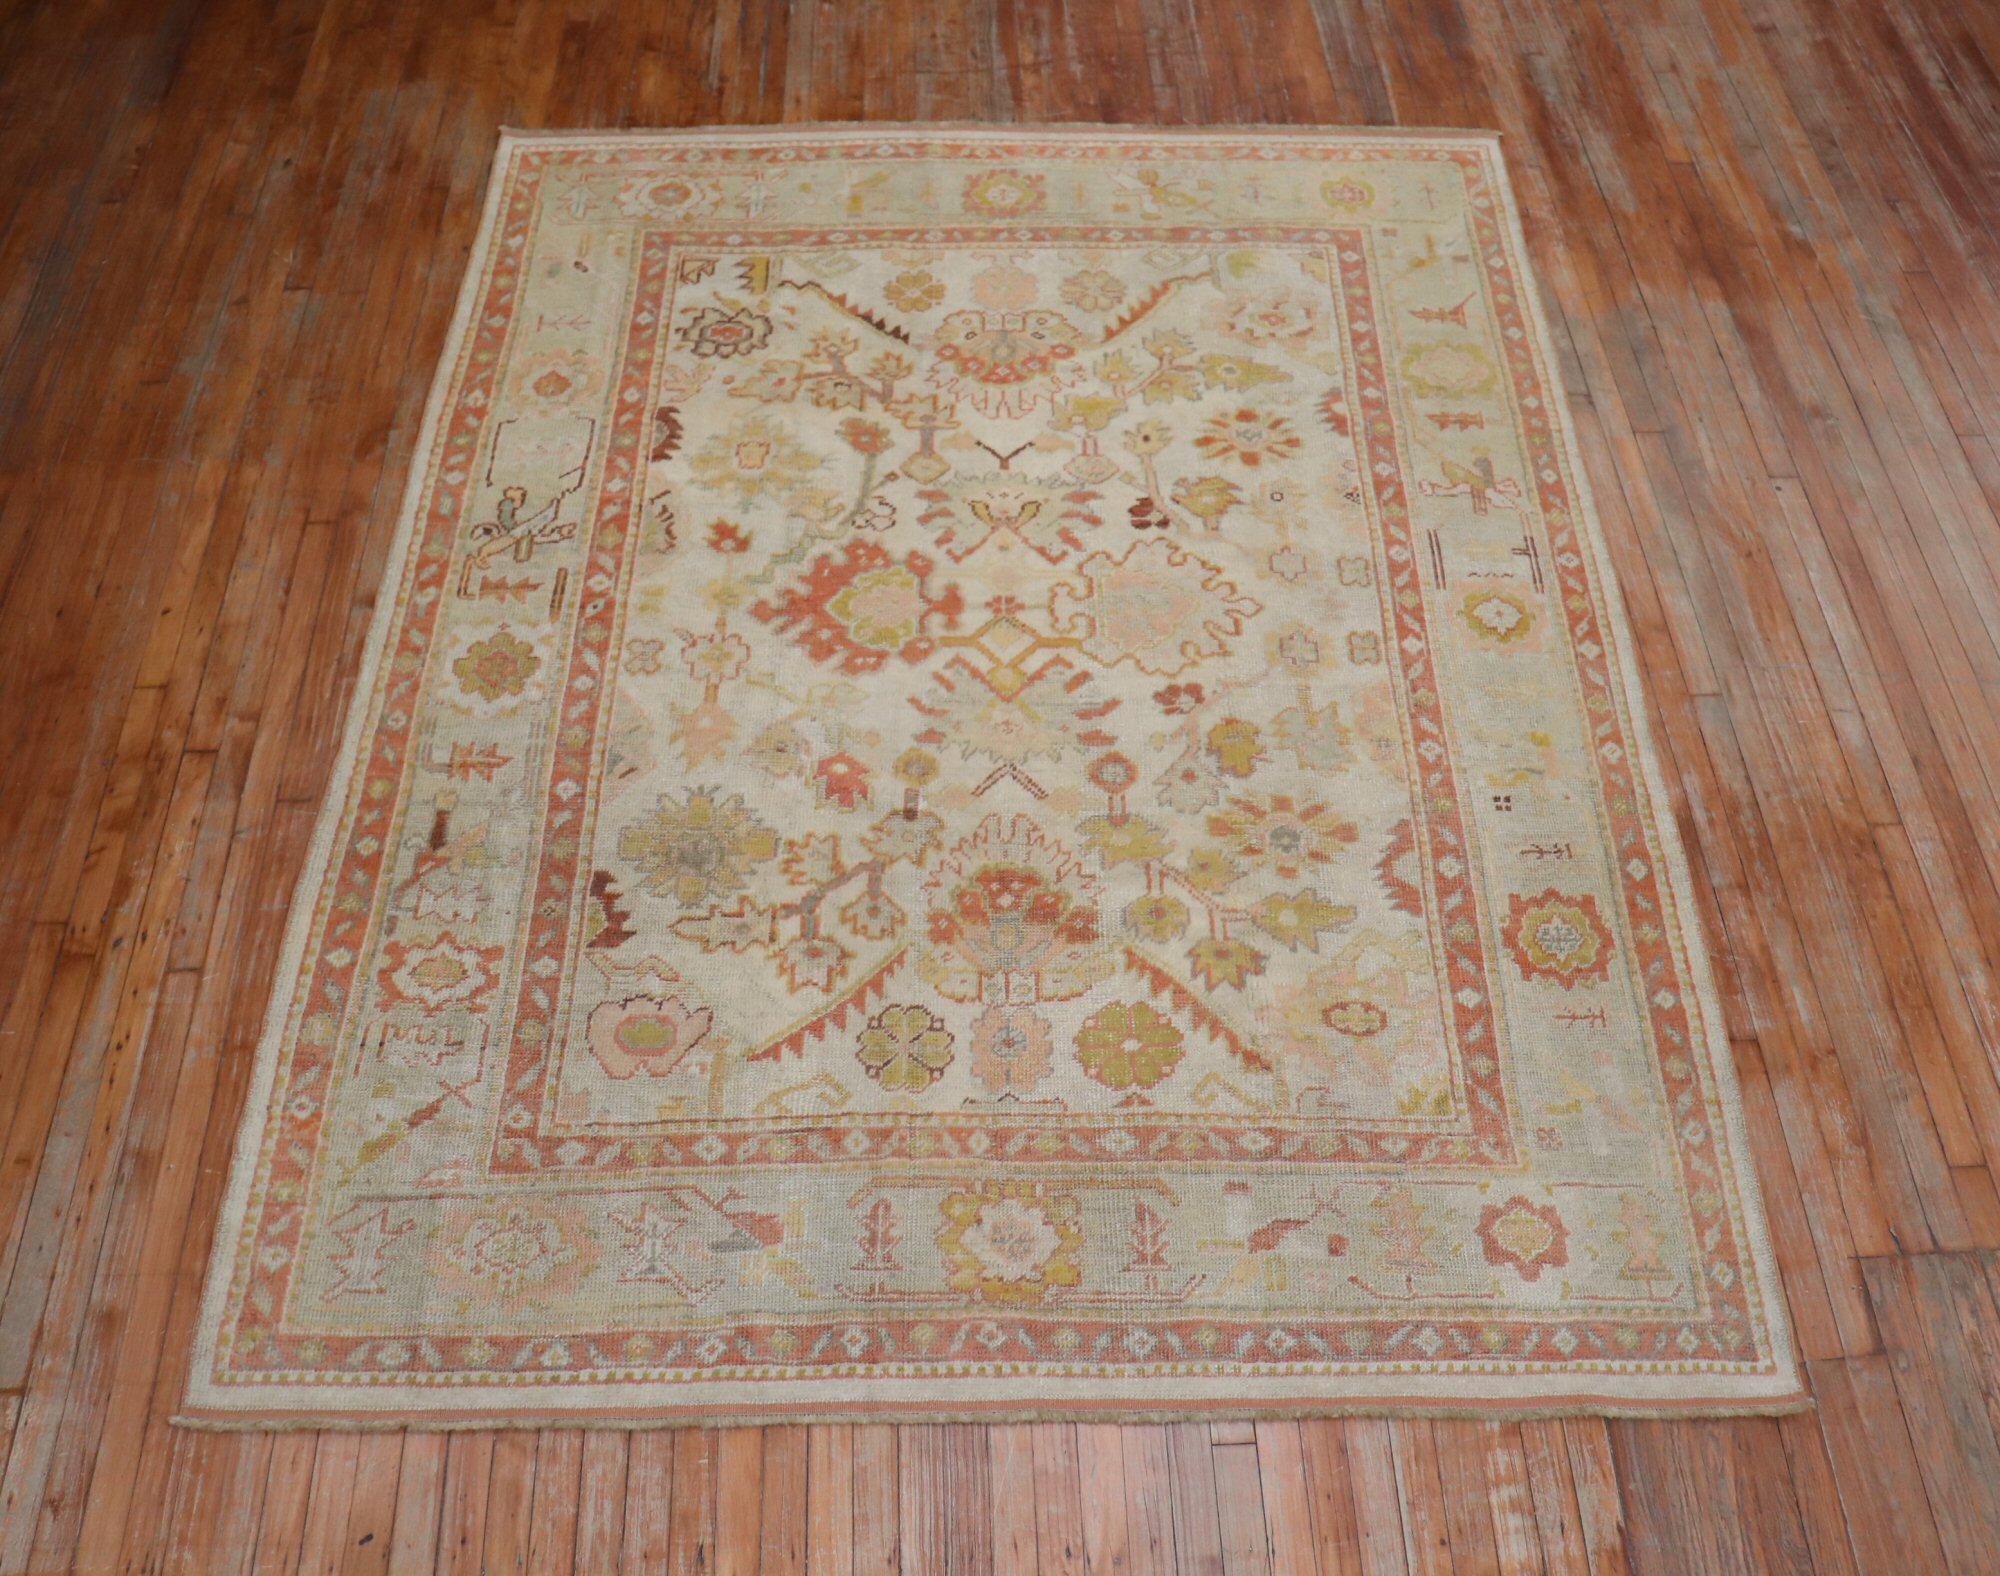 Dutch Colonial Stunning Ivory Ground Antique Turkish Oushak Room Size Carpet For Sale